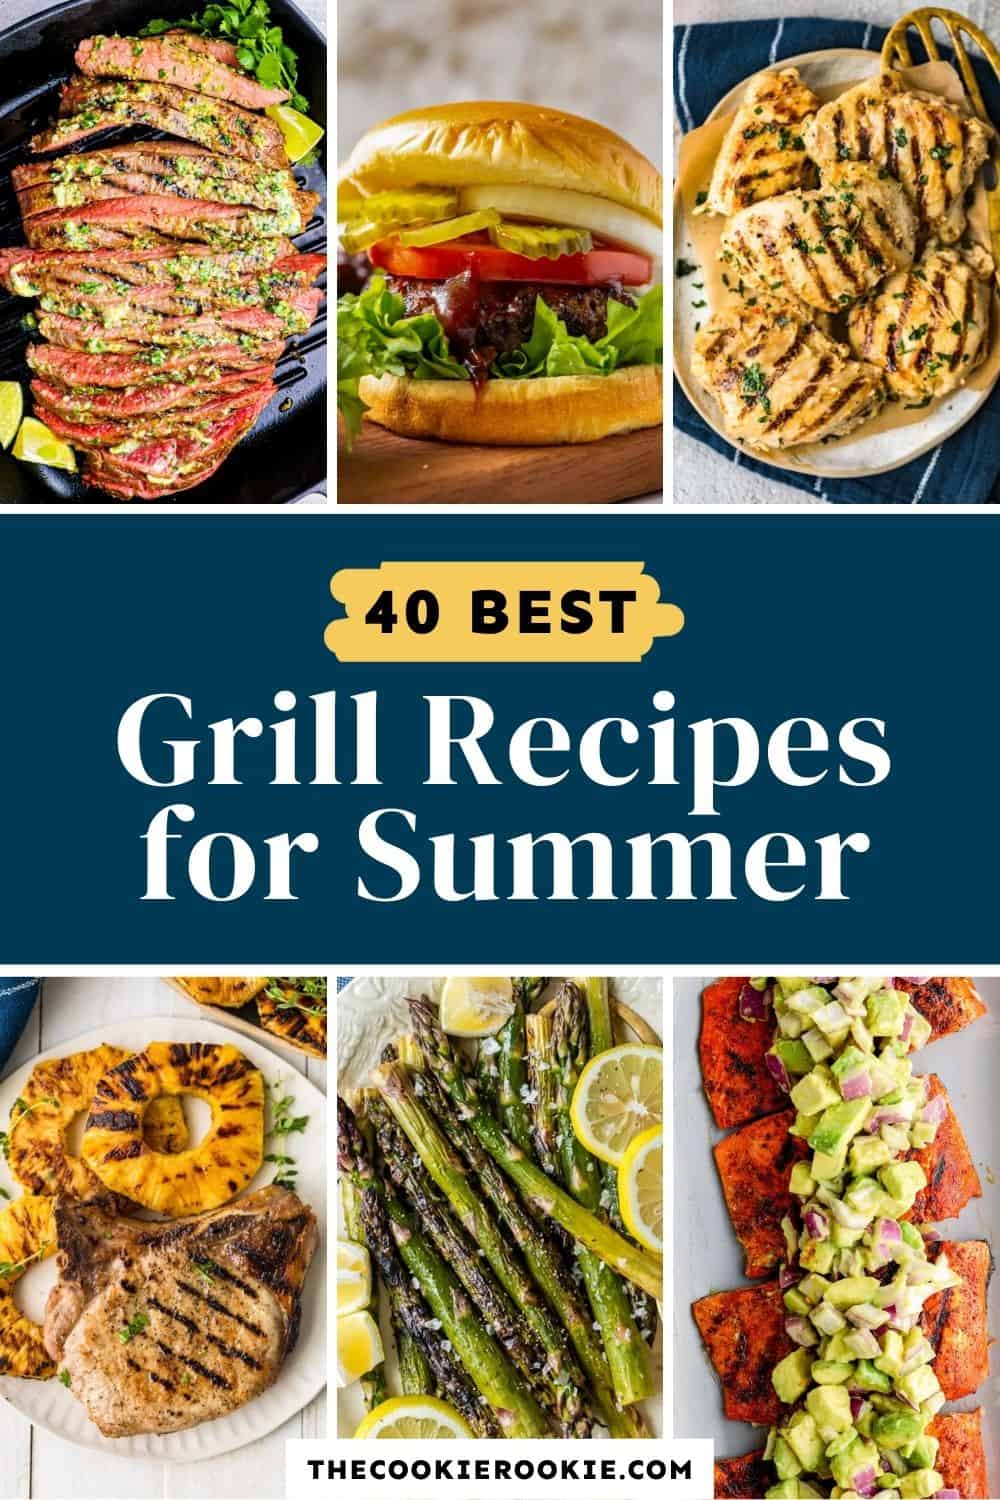 50 Best BBQ Recipes for Summer!